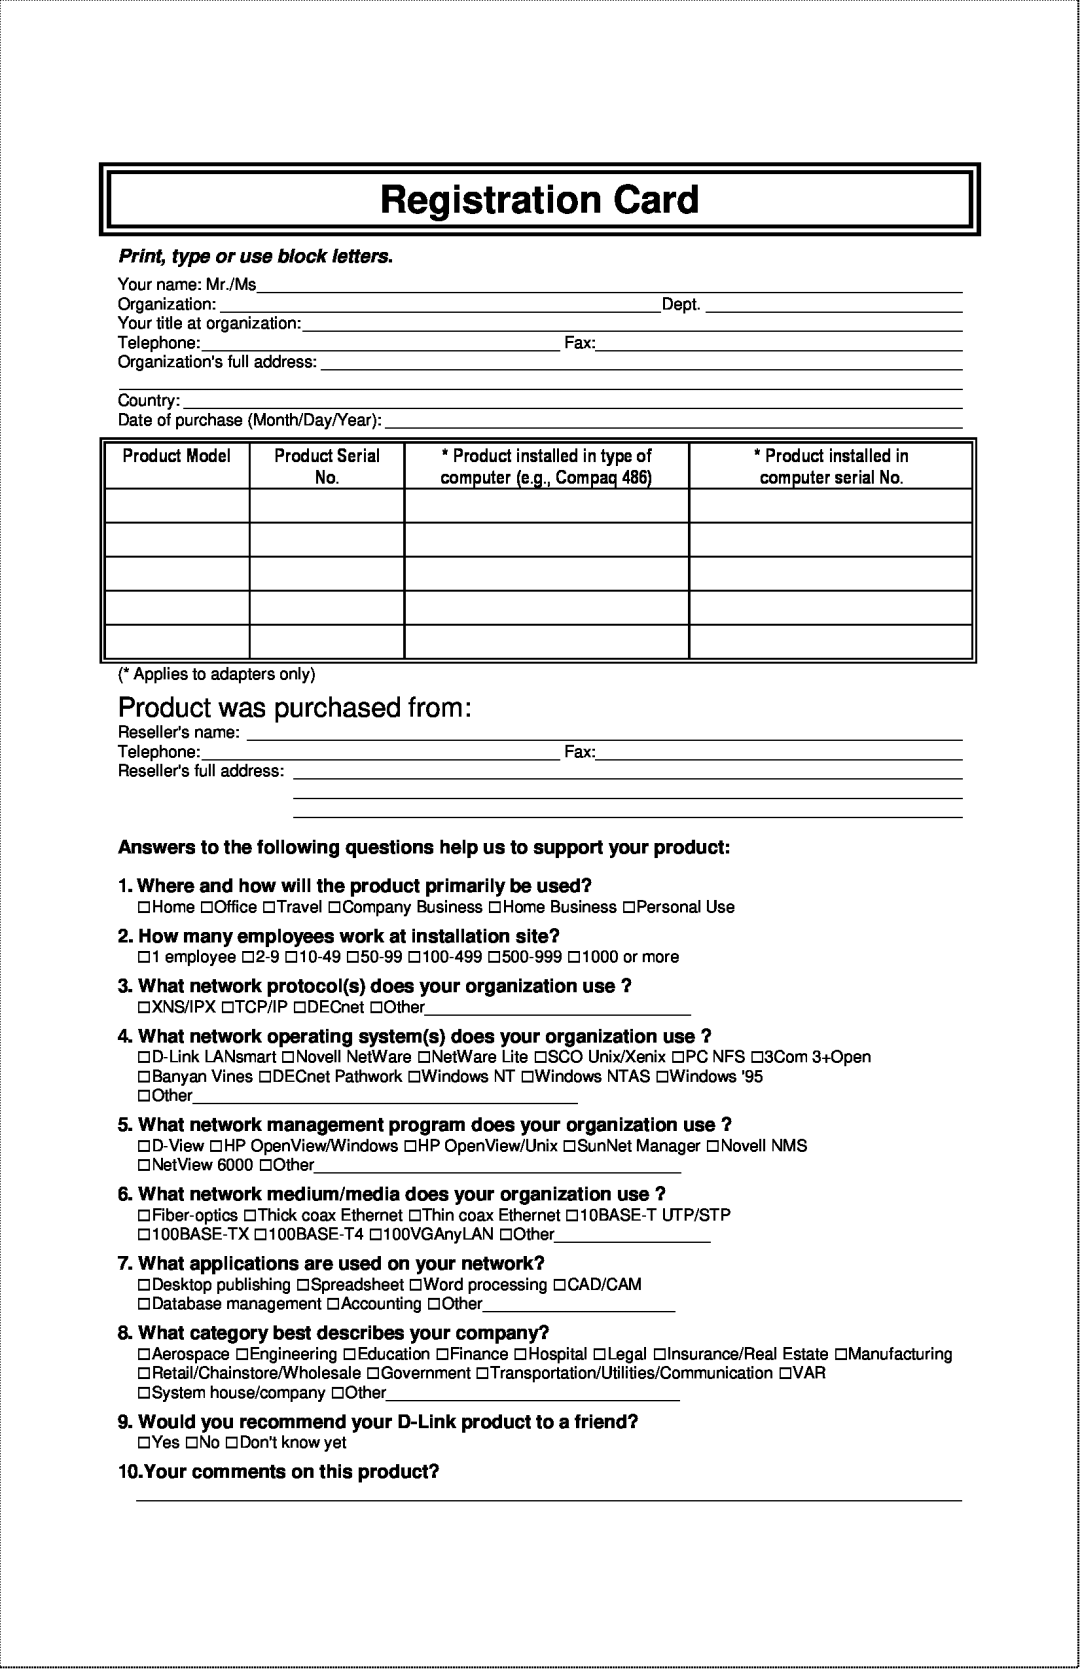 D-Link DFE-2600 manual Registration Card, Product was purchased from, Print, type or use block letters 